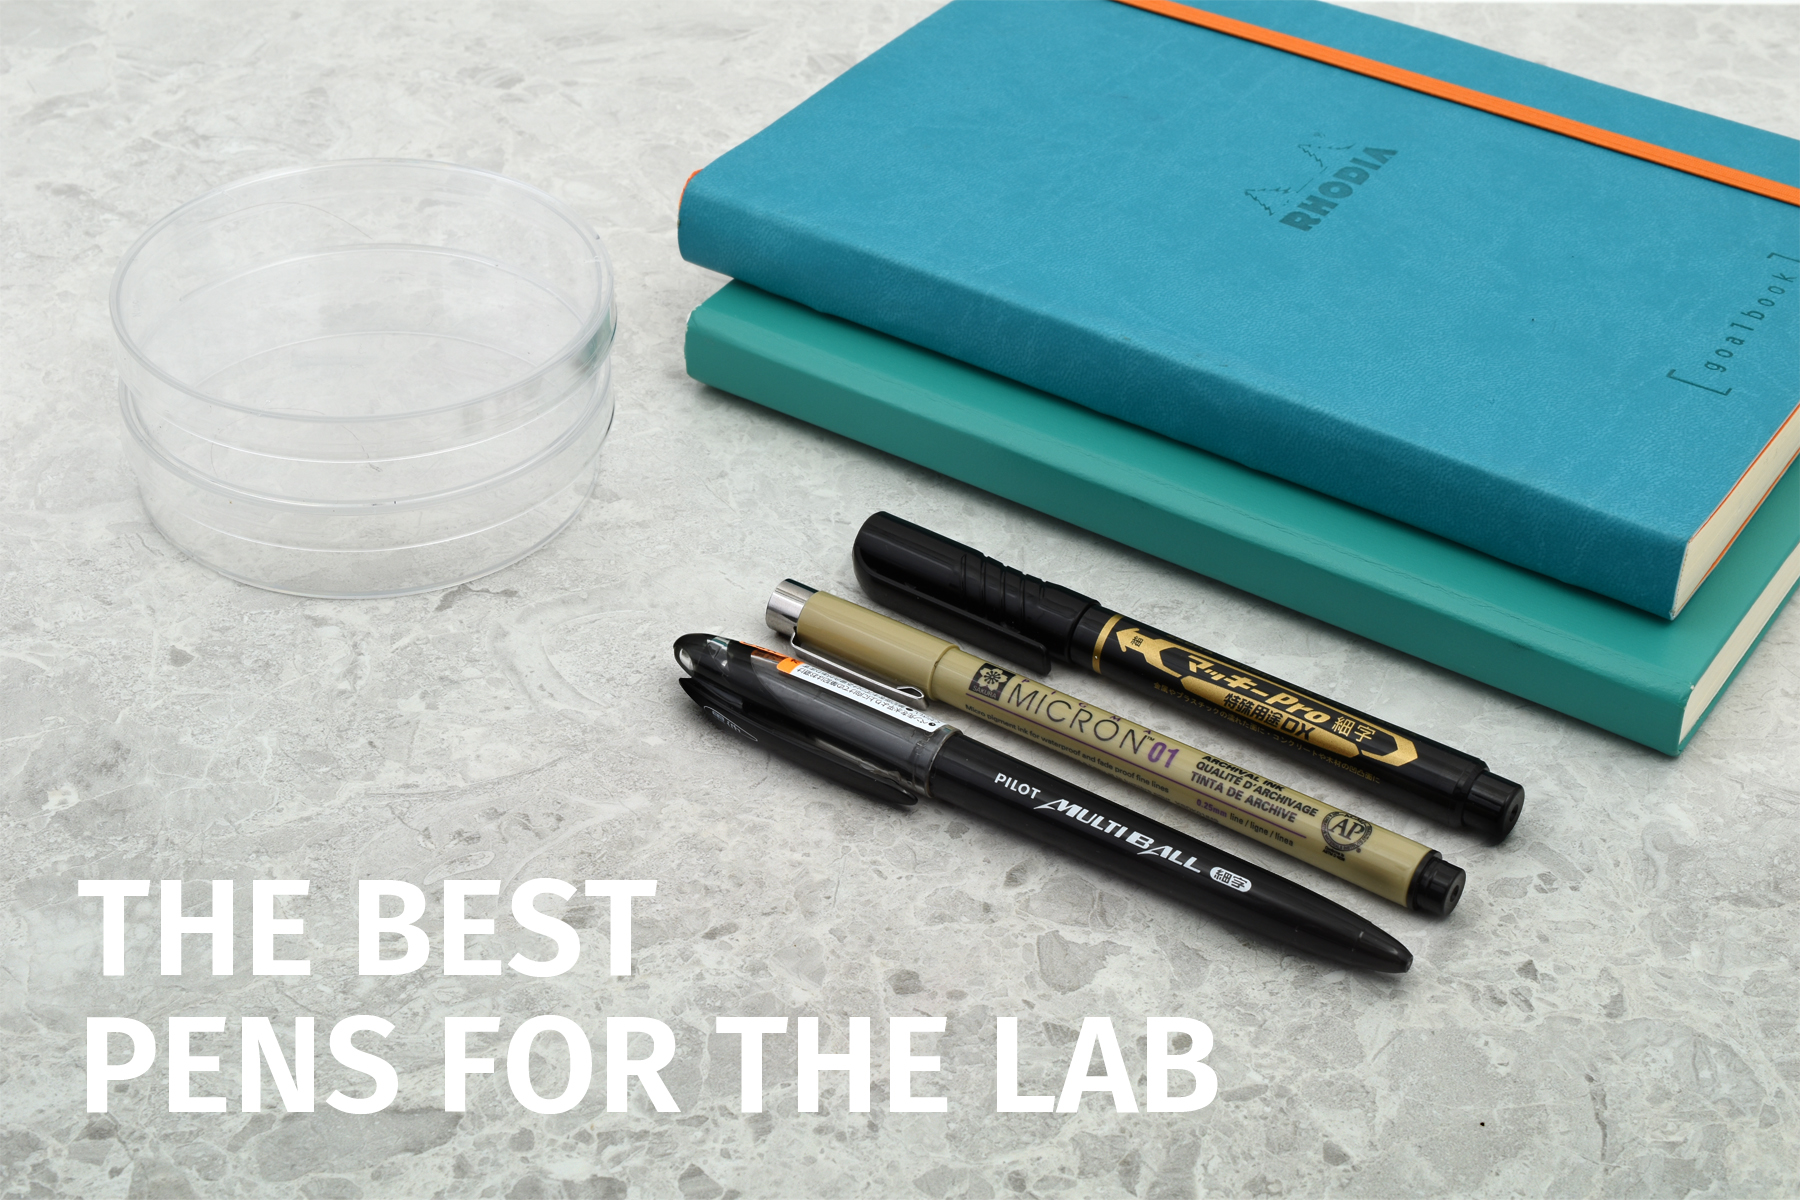 The Best Pens for the Lab